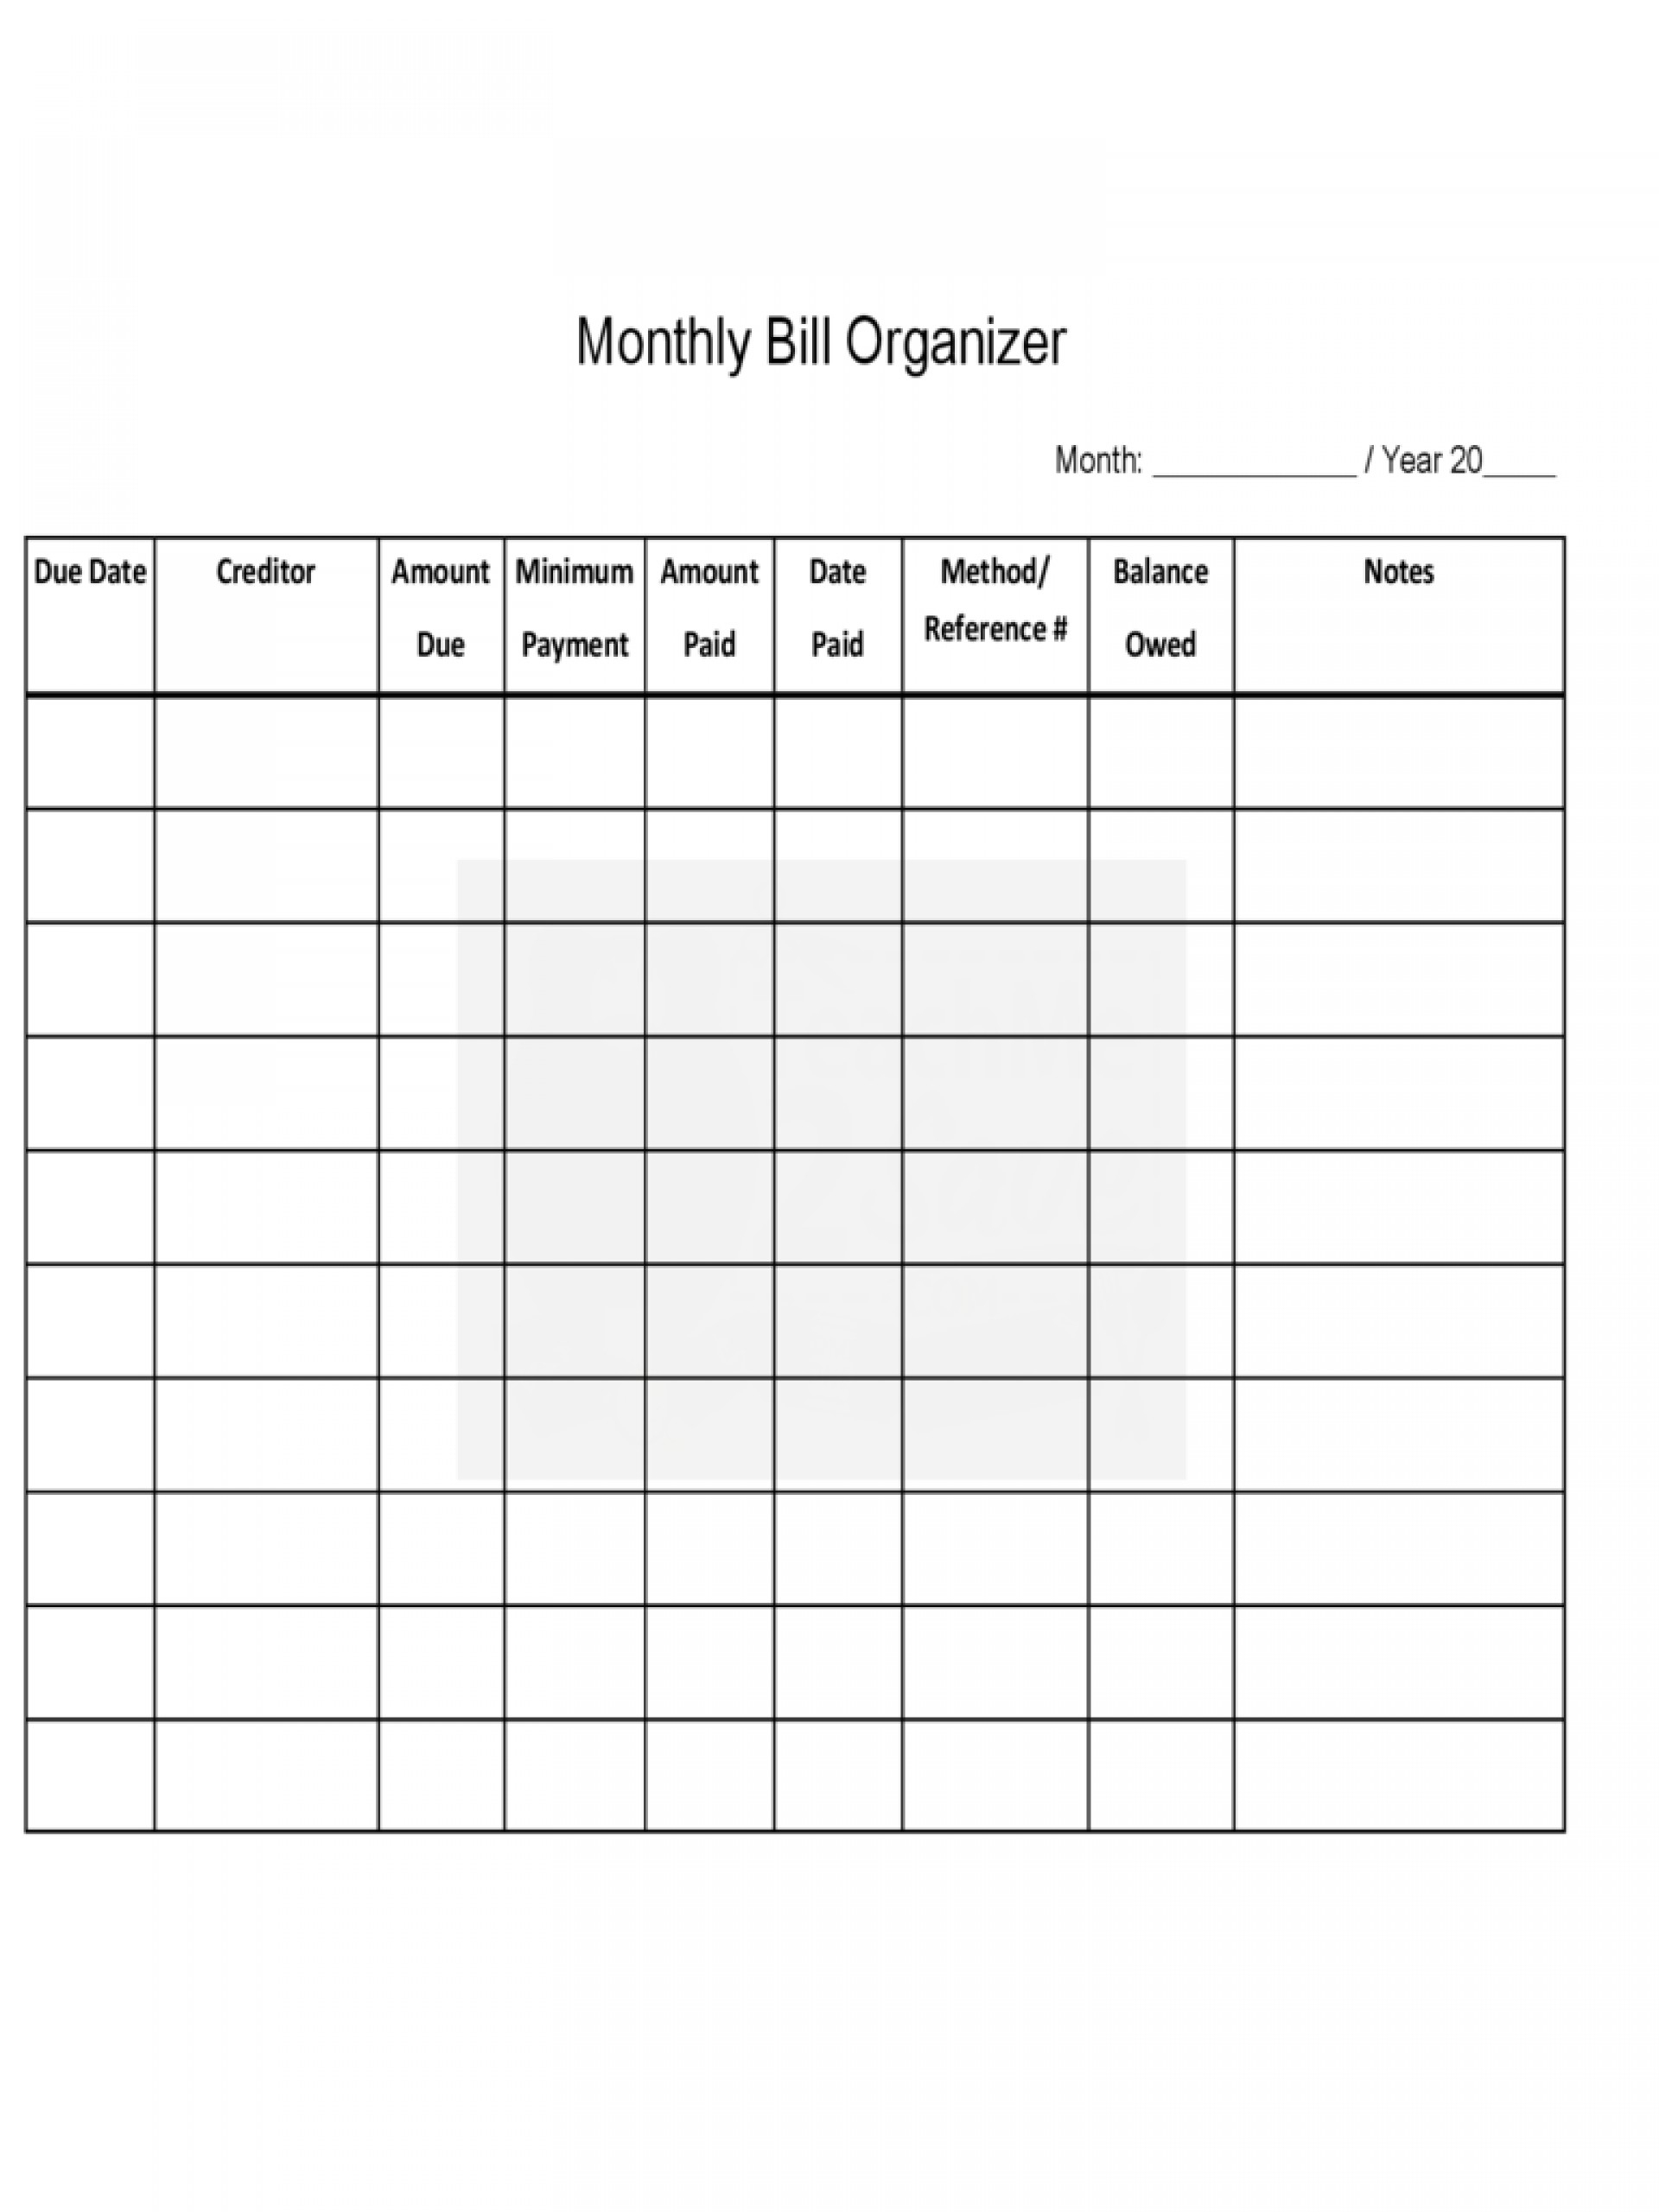 Monthly Payment Spreadsheet Koran sticken co Free Printable Monthly 